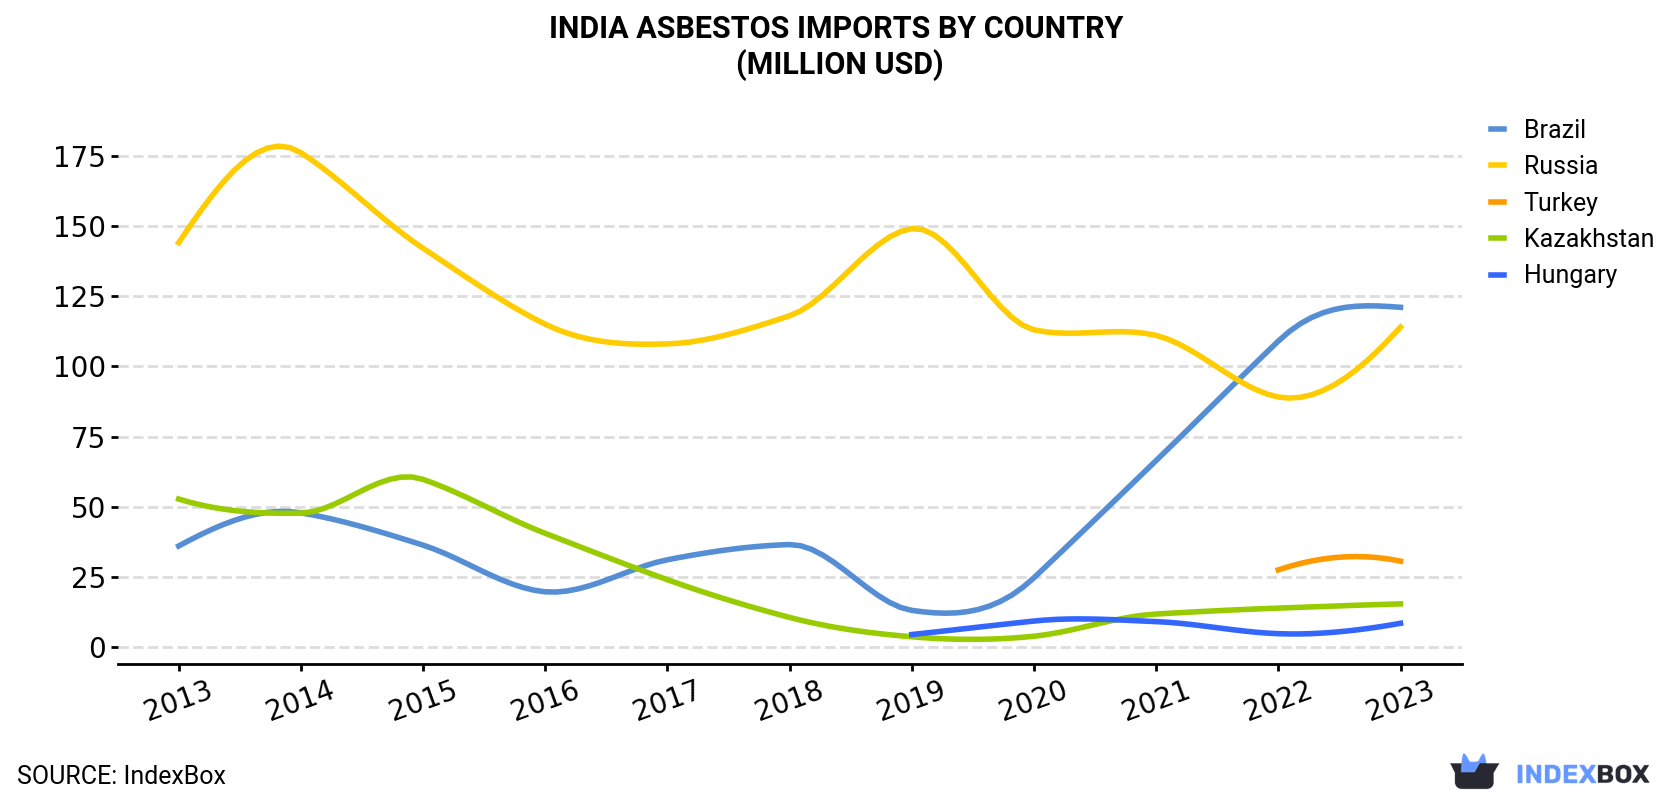 India Asbestos Imports By Country (Million USD)